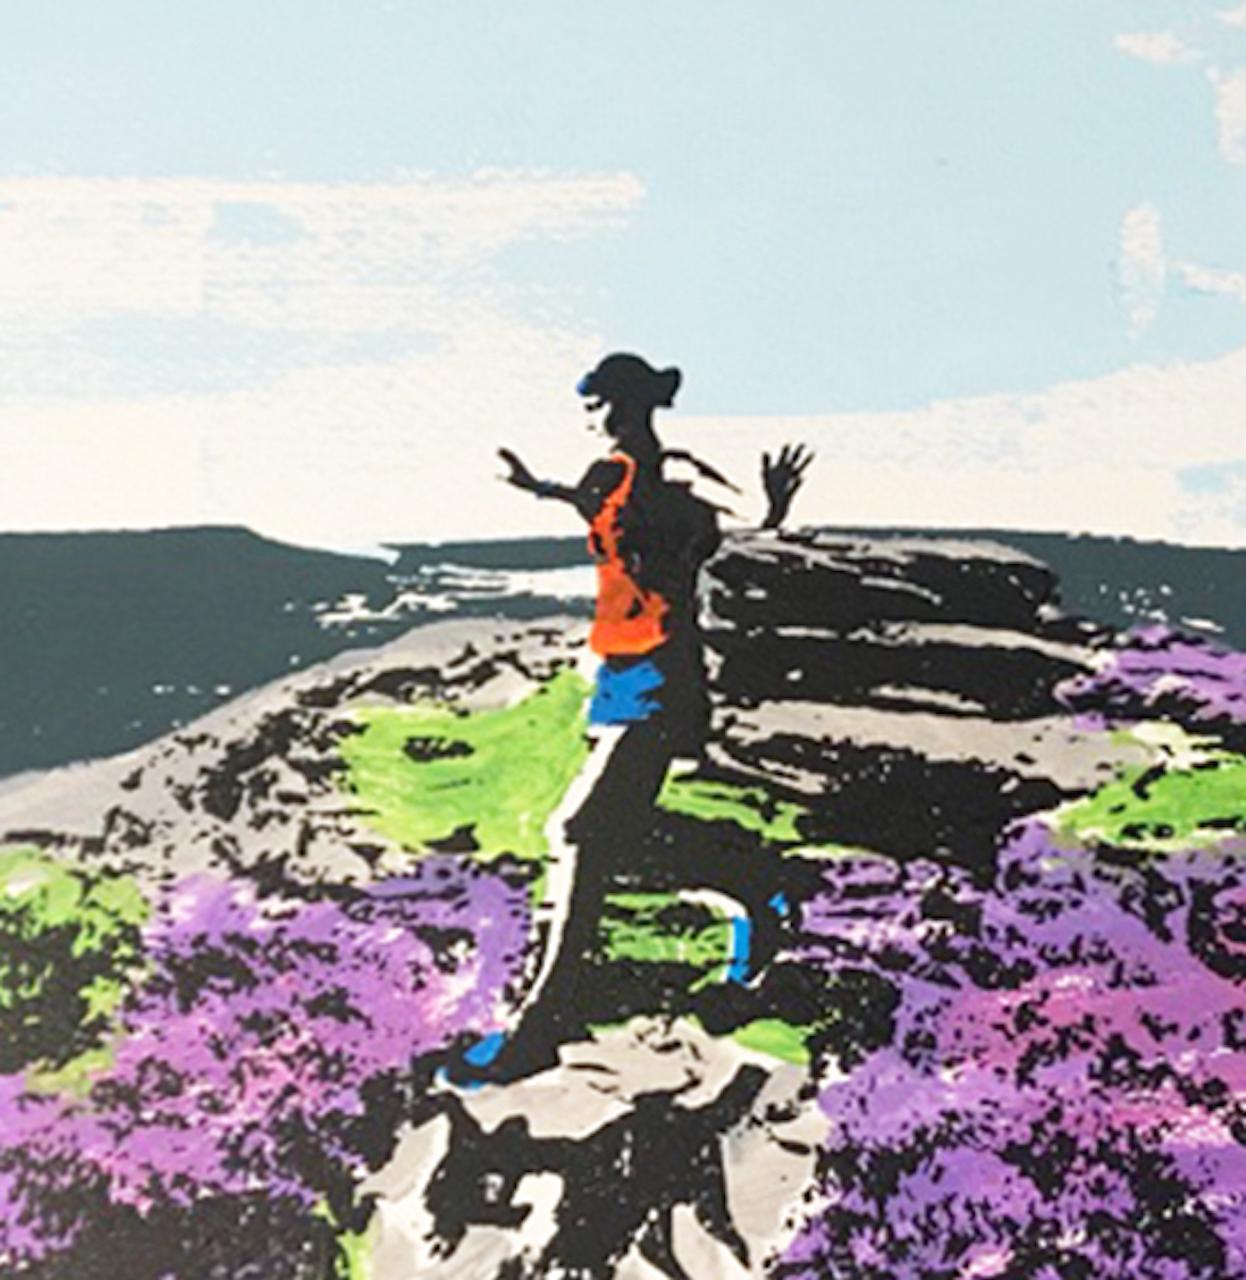 Katie Edwards
Over Owler Tor
Limited Edition Silkscreen Print with Hand Painted Layers
Edition of 50
Size: H 40.5cm x W 50.8cm x D 0.5cm
Sold Unframed
Please note that insitu images are purely an indication of how a piece may look.

Over Owler Tor